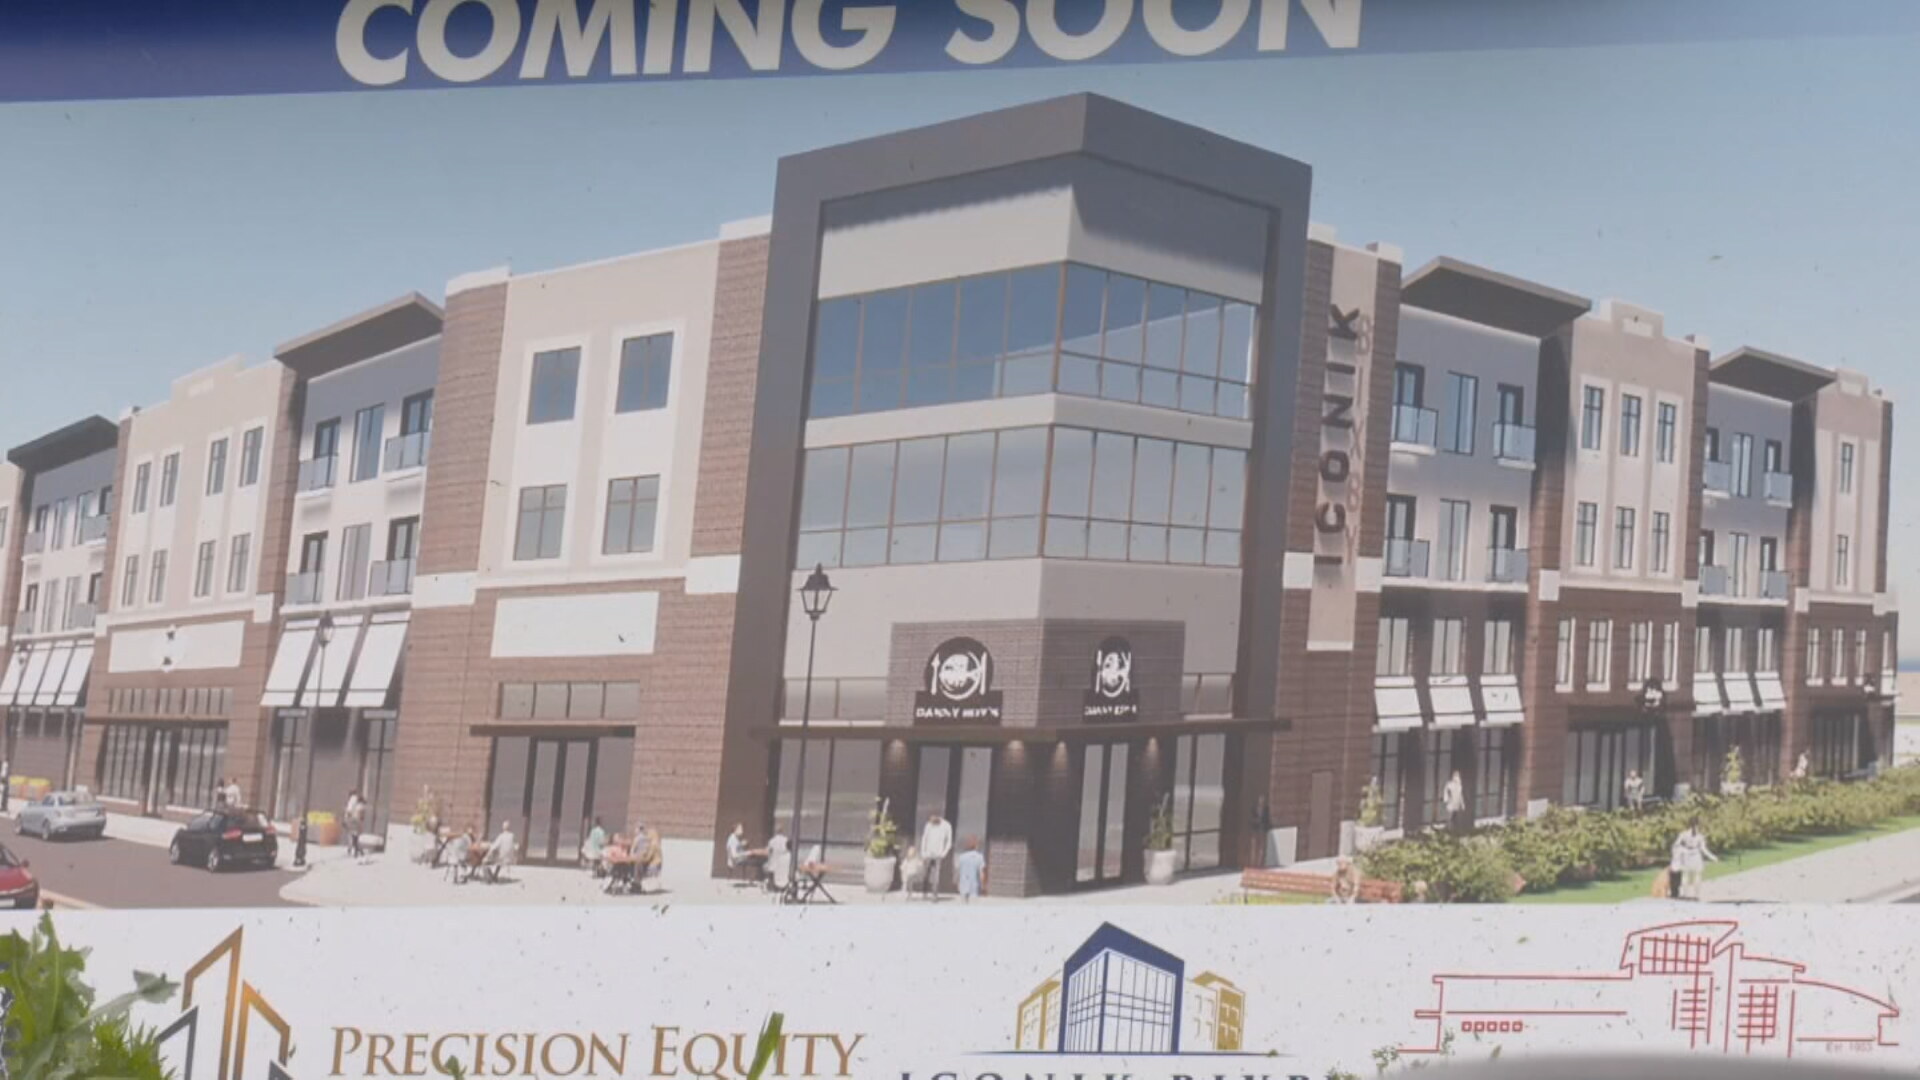 New Project In Bixby Aims To Revitalize Downtown Area